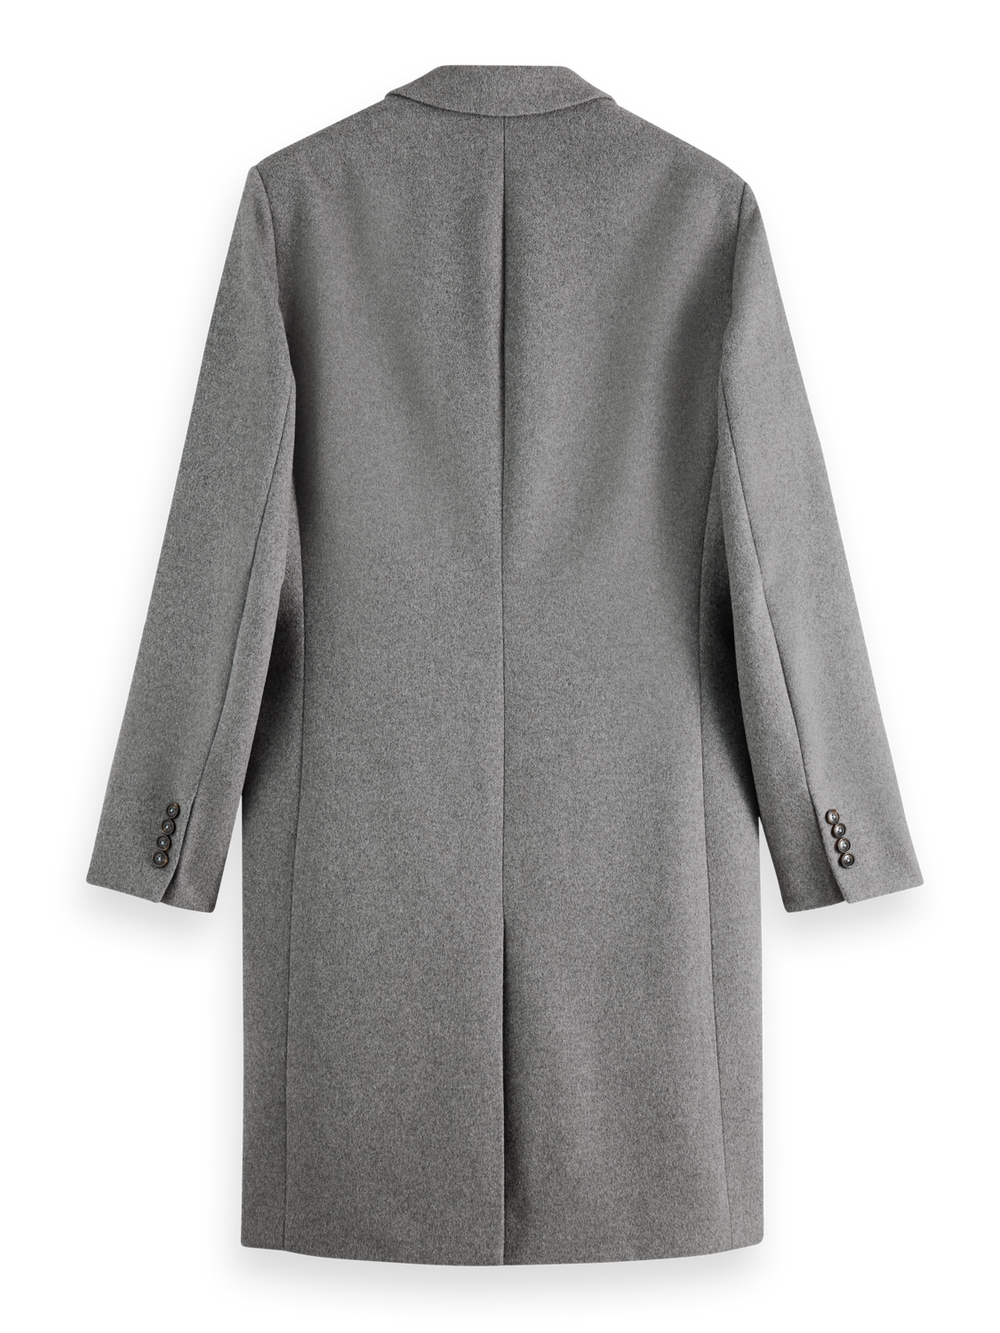 Classic Wool Blend Overcoat in Grey Melange | Buster McGee